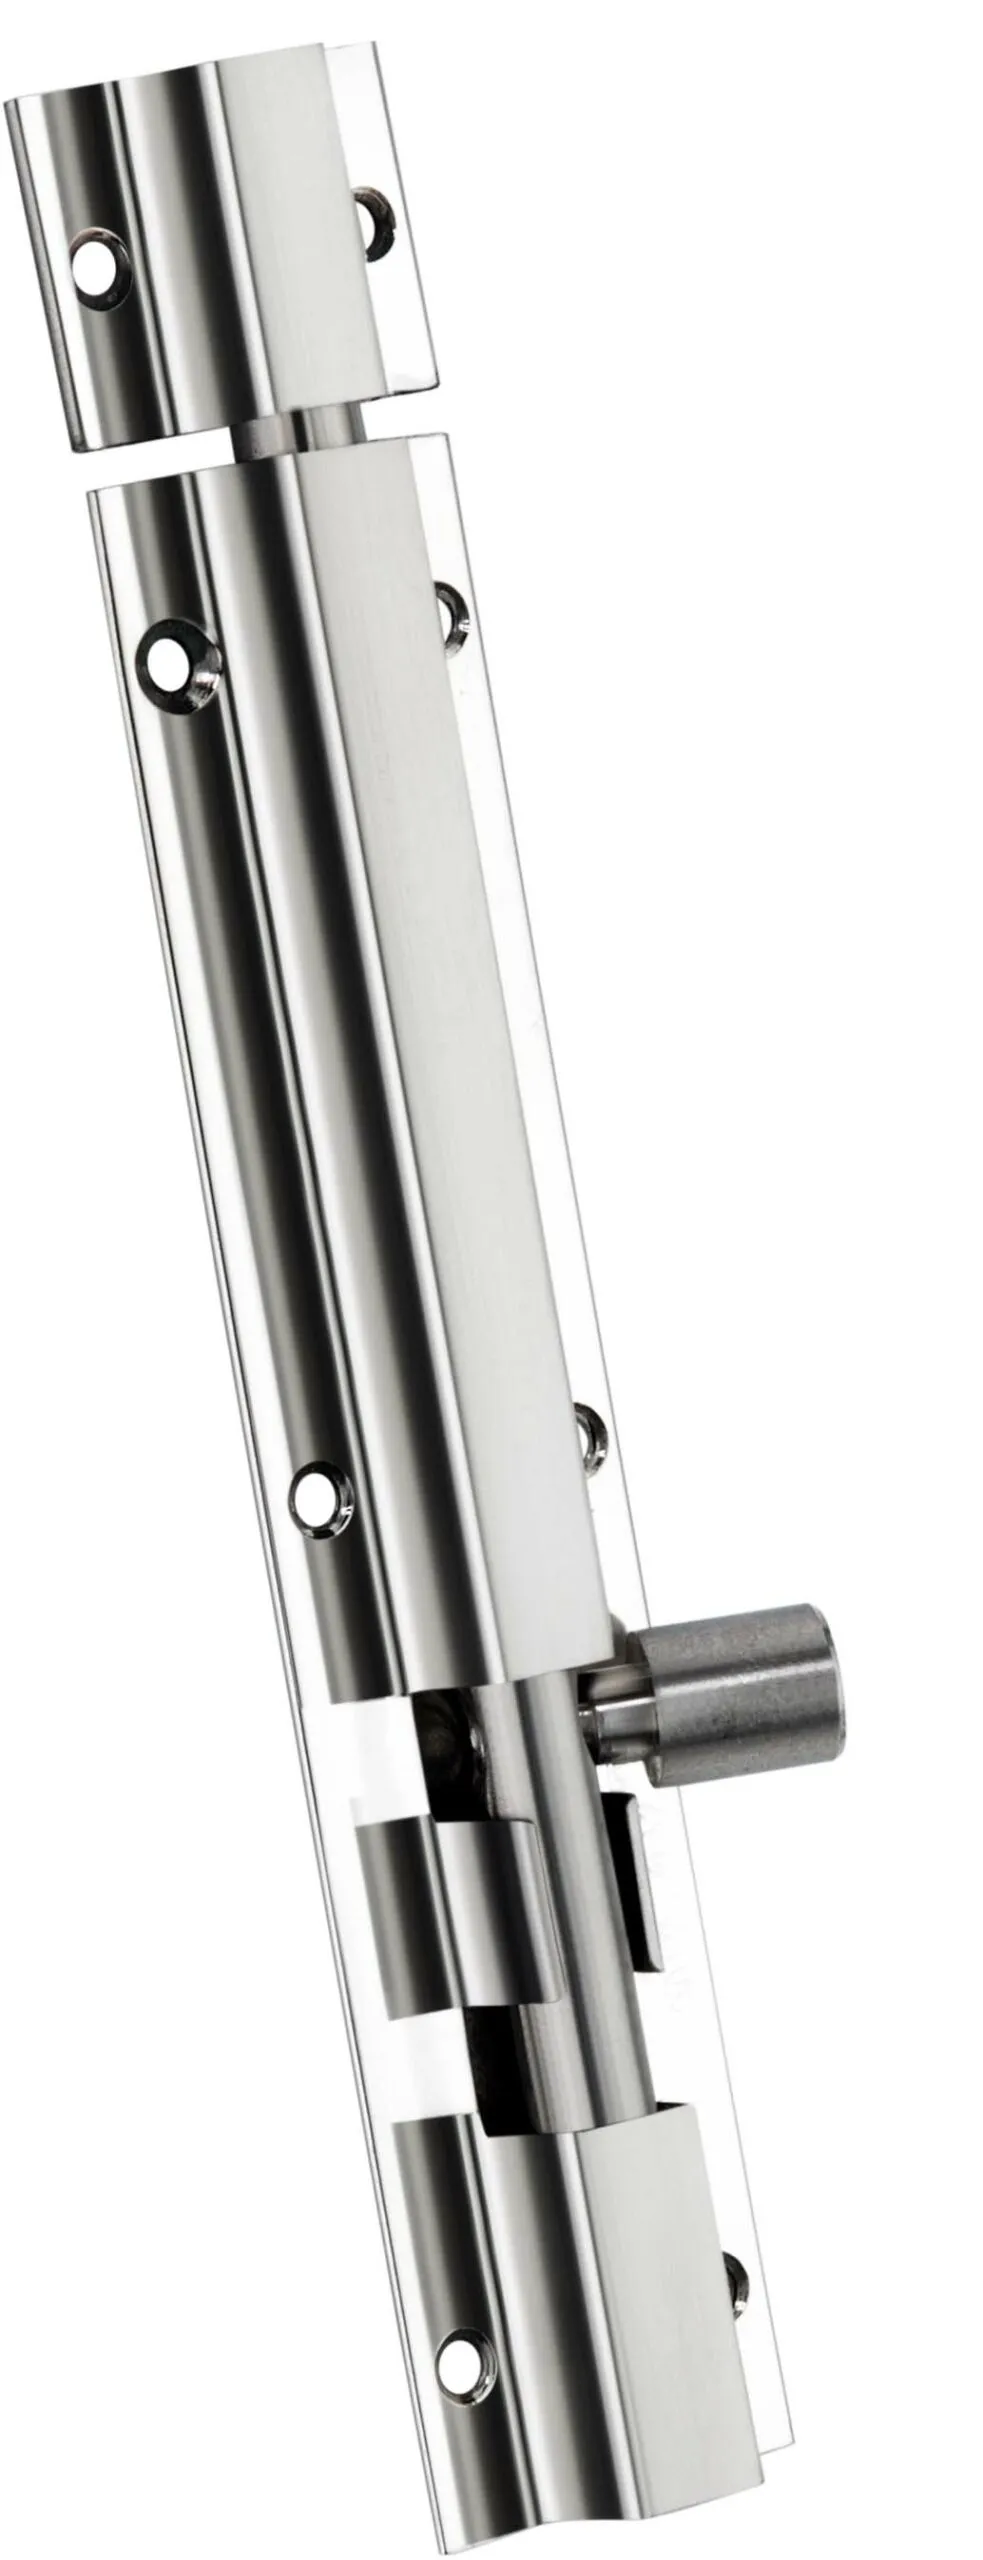 Plaza Tower Bolt Two Pc (4, 6, 8, 10, 12, 18, 24 Inches)